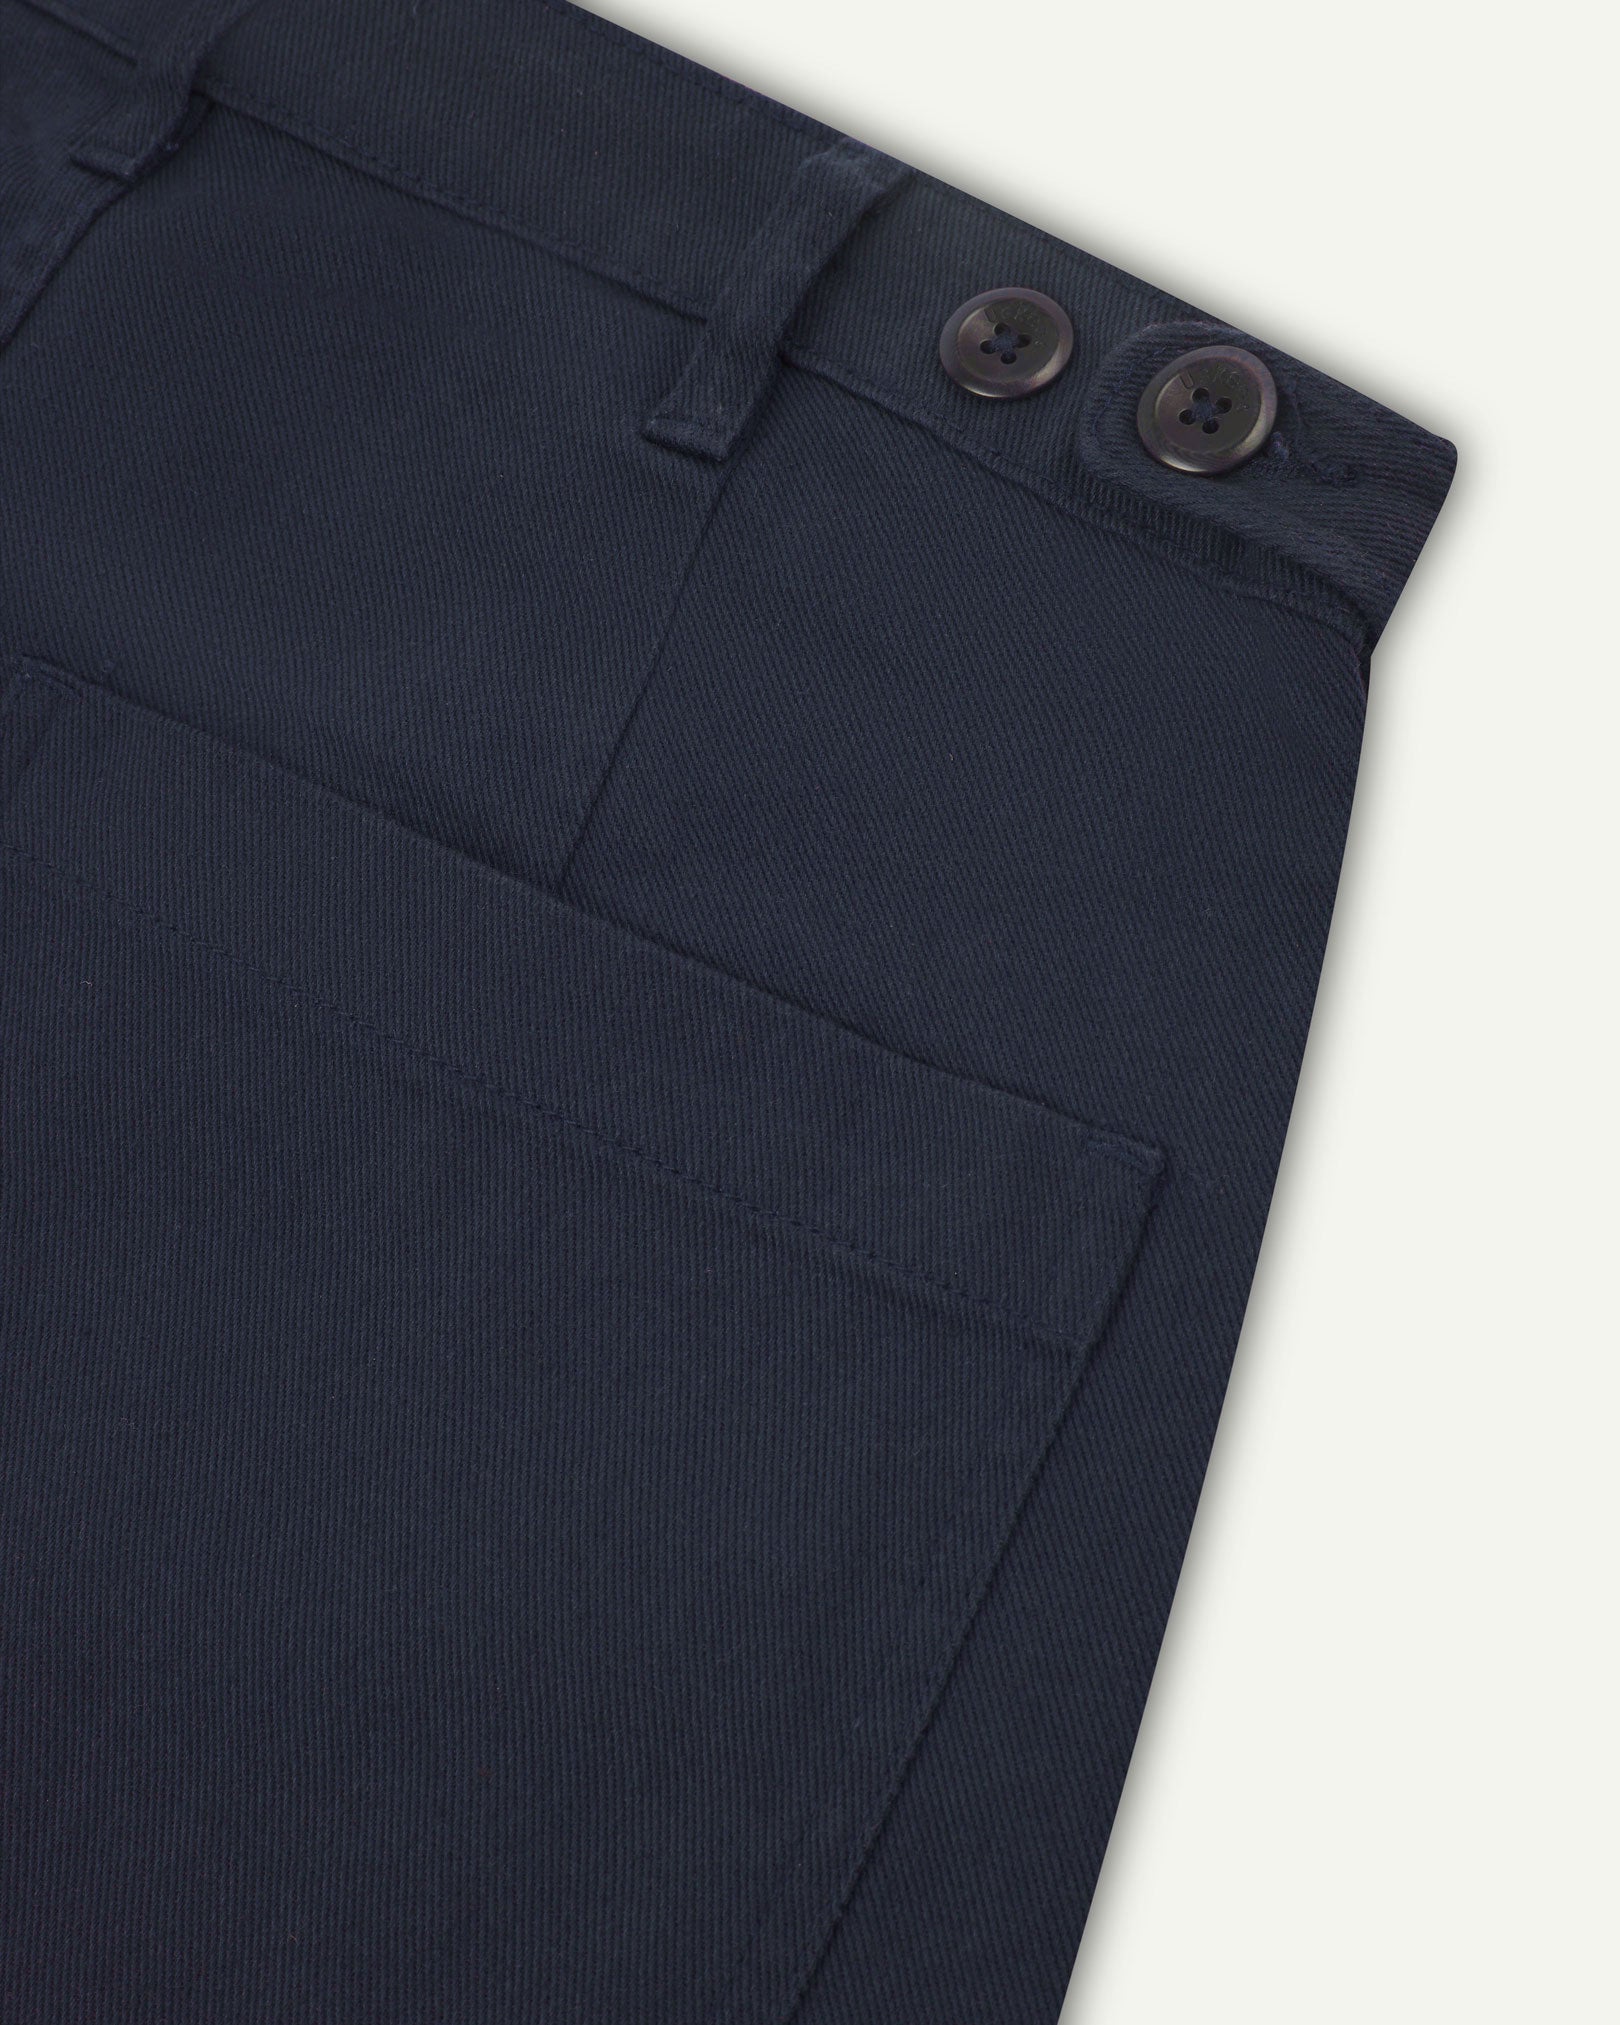 Reverse close-up of 5013 Uskees drill straight leg pants in dark blue, with focus on left rear pocket, belt loops and adjustable waistband with corozo buttons.